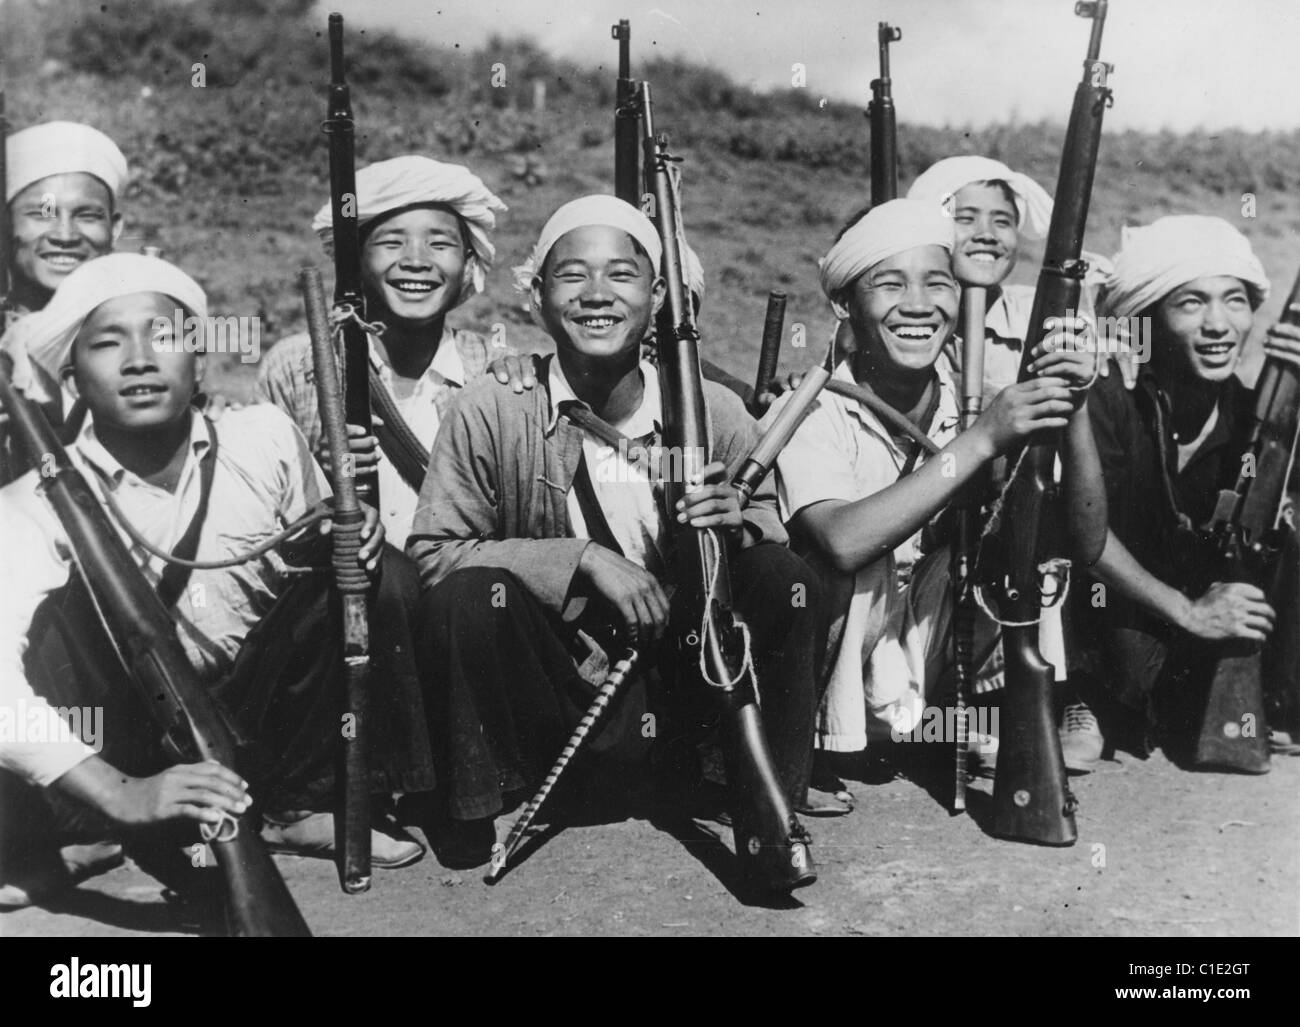 BURMESE ARMY TRIBESMEN 1944 Under command of General Alexander against the Japanese they hold their newly issued rifles Stock Photo